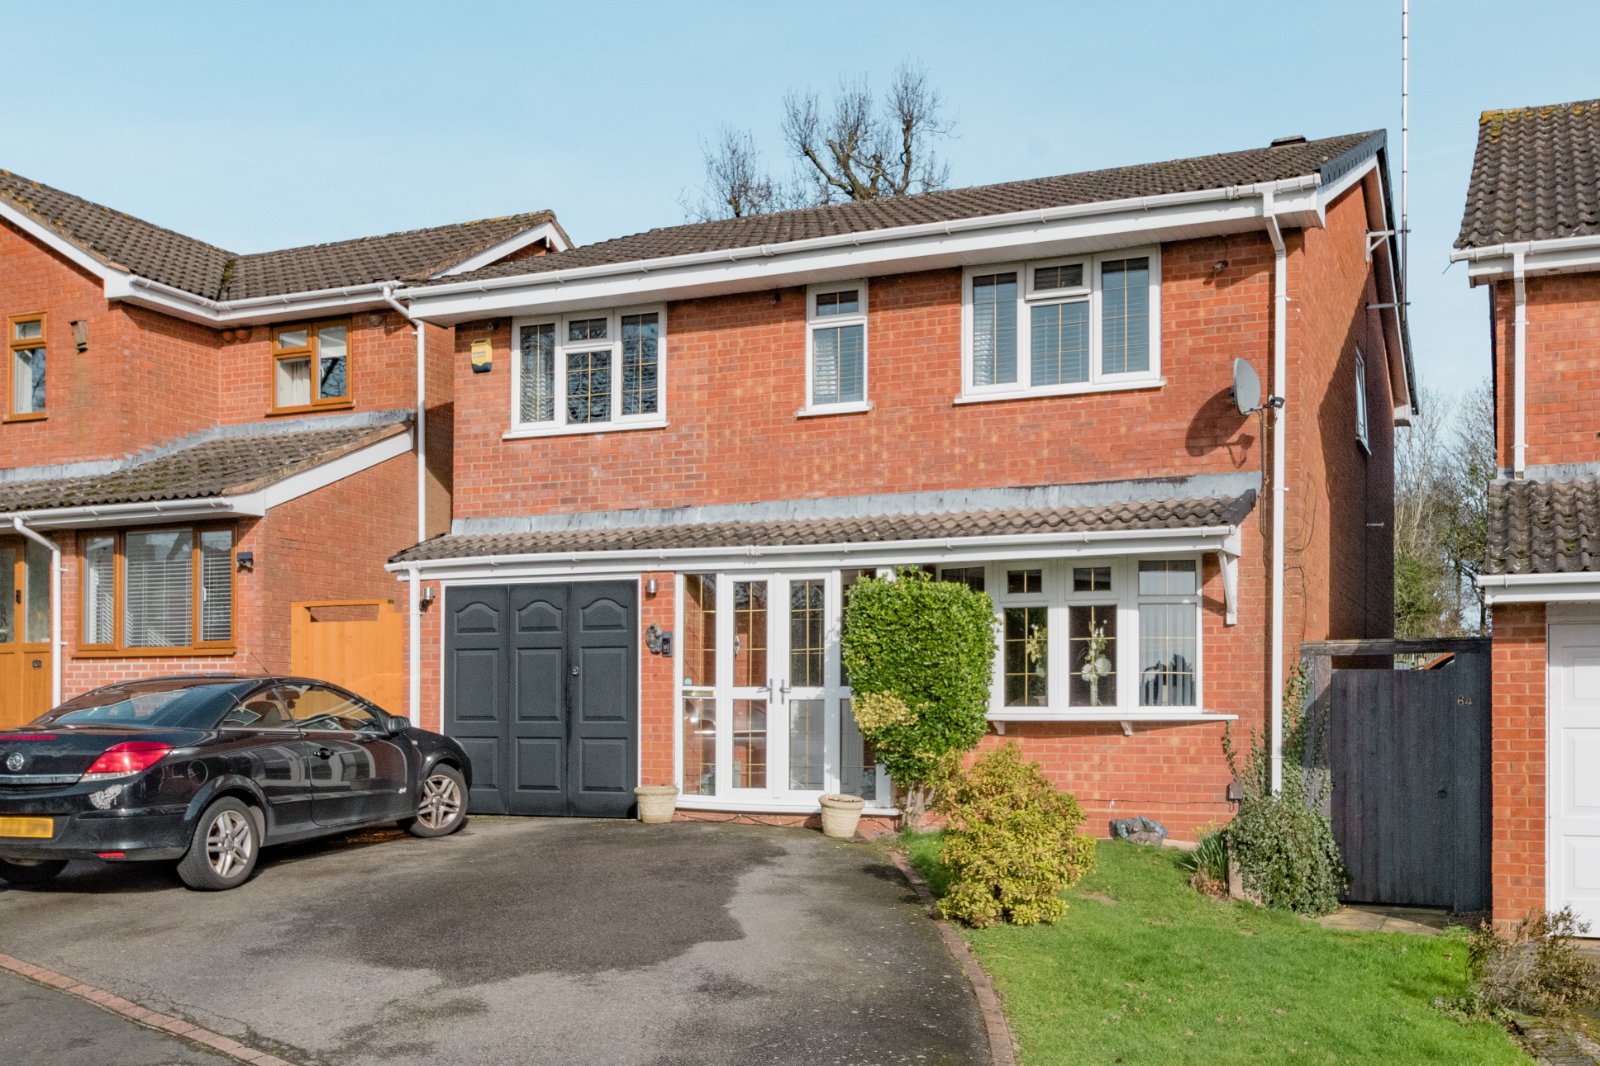 5 bed house for sale in Packwood Close, Webheath  - Property Image 1